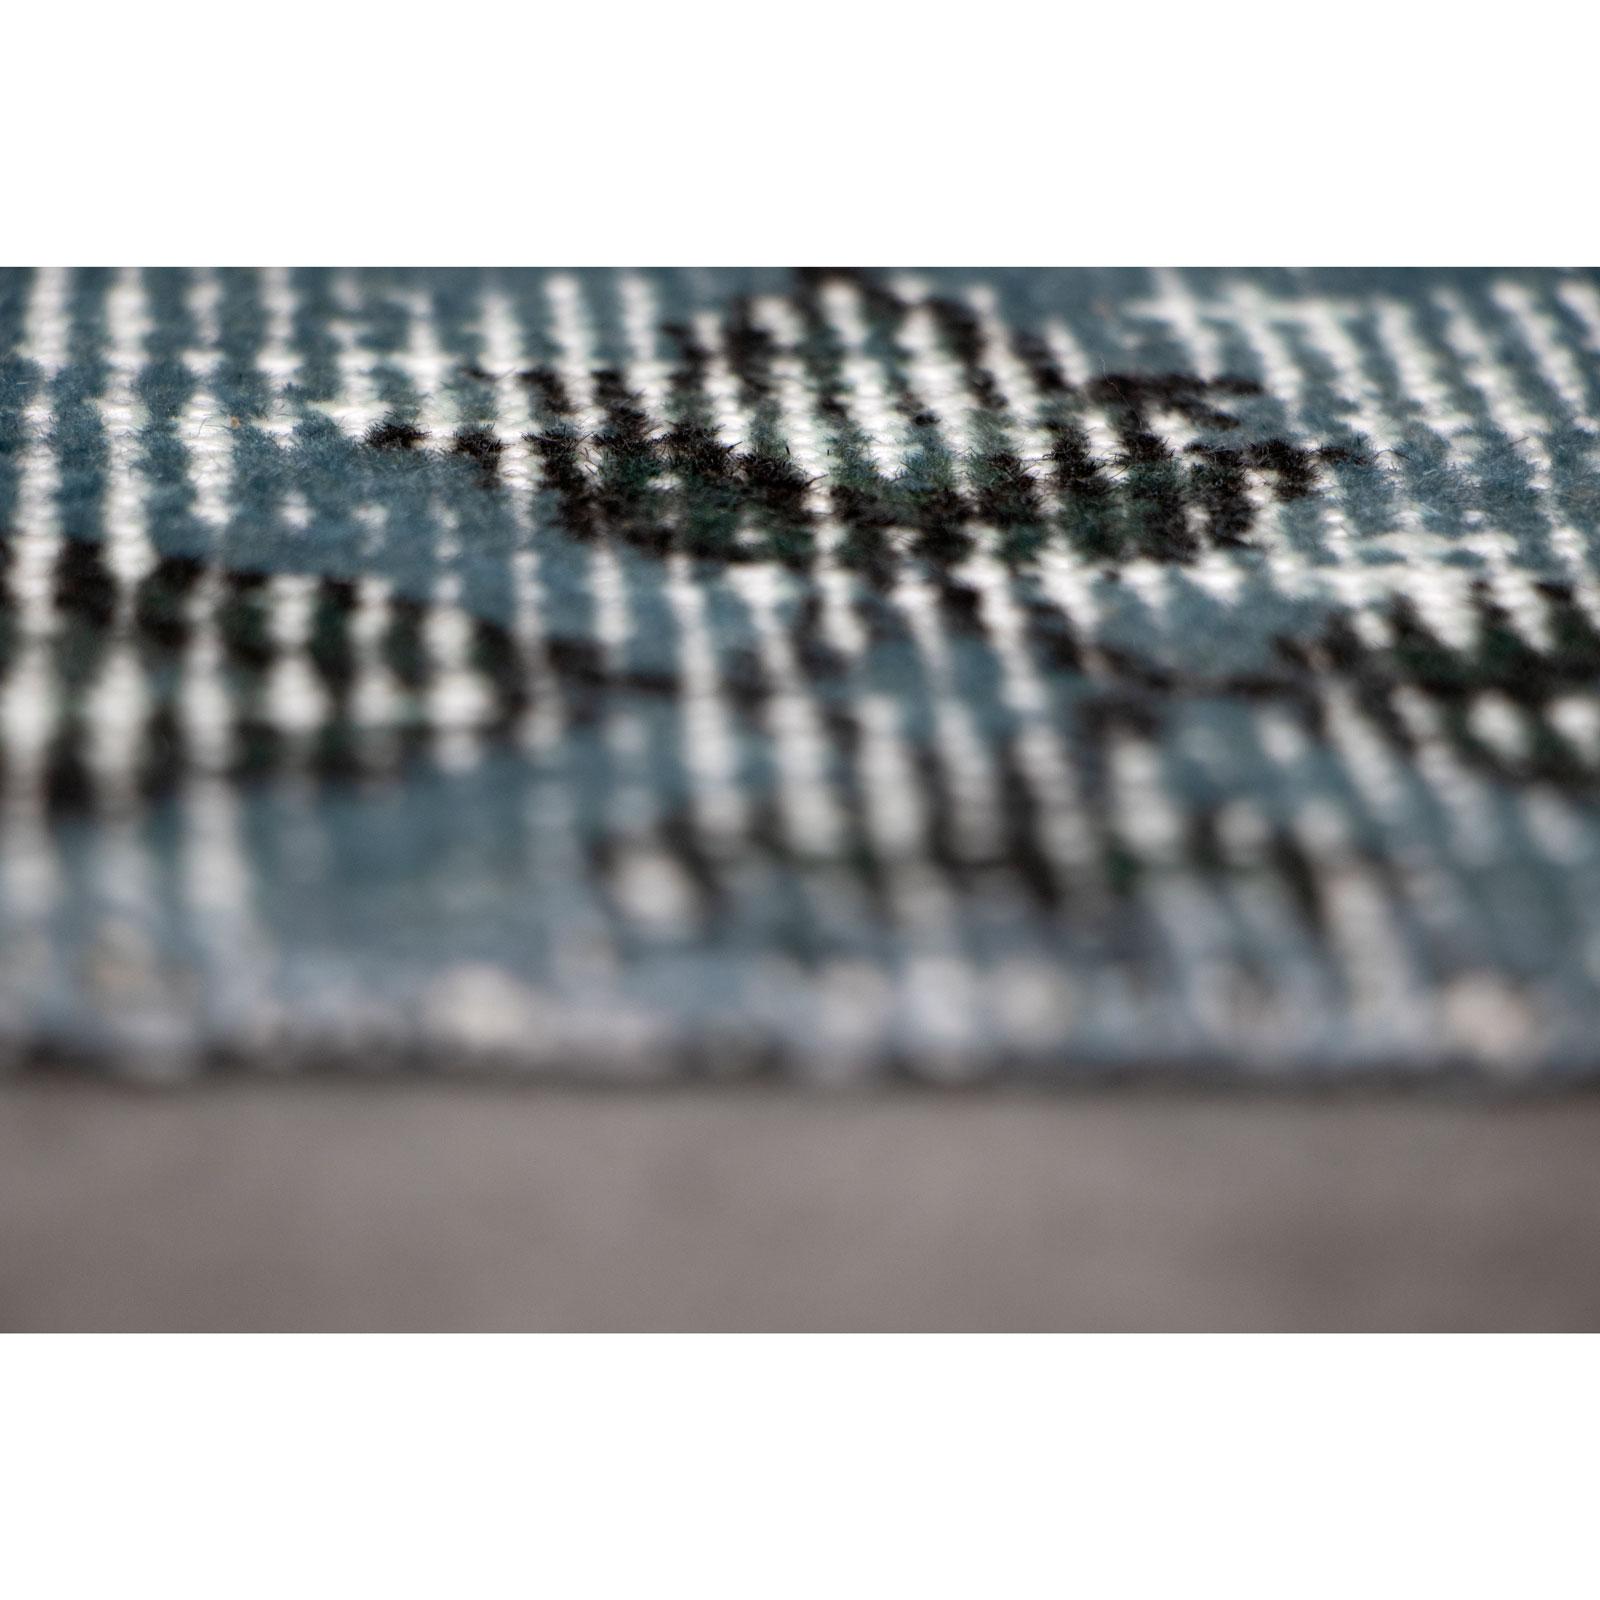 Antique Chic Vintage Blue Brown Wool Cotton Rug by Deanna Comellini 250x350 cm In New Condition For Sale In Bologna, IT